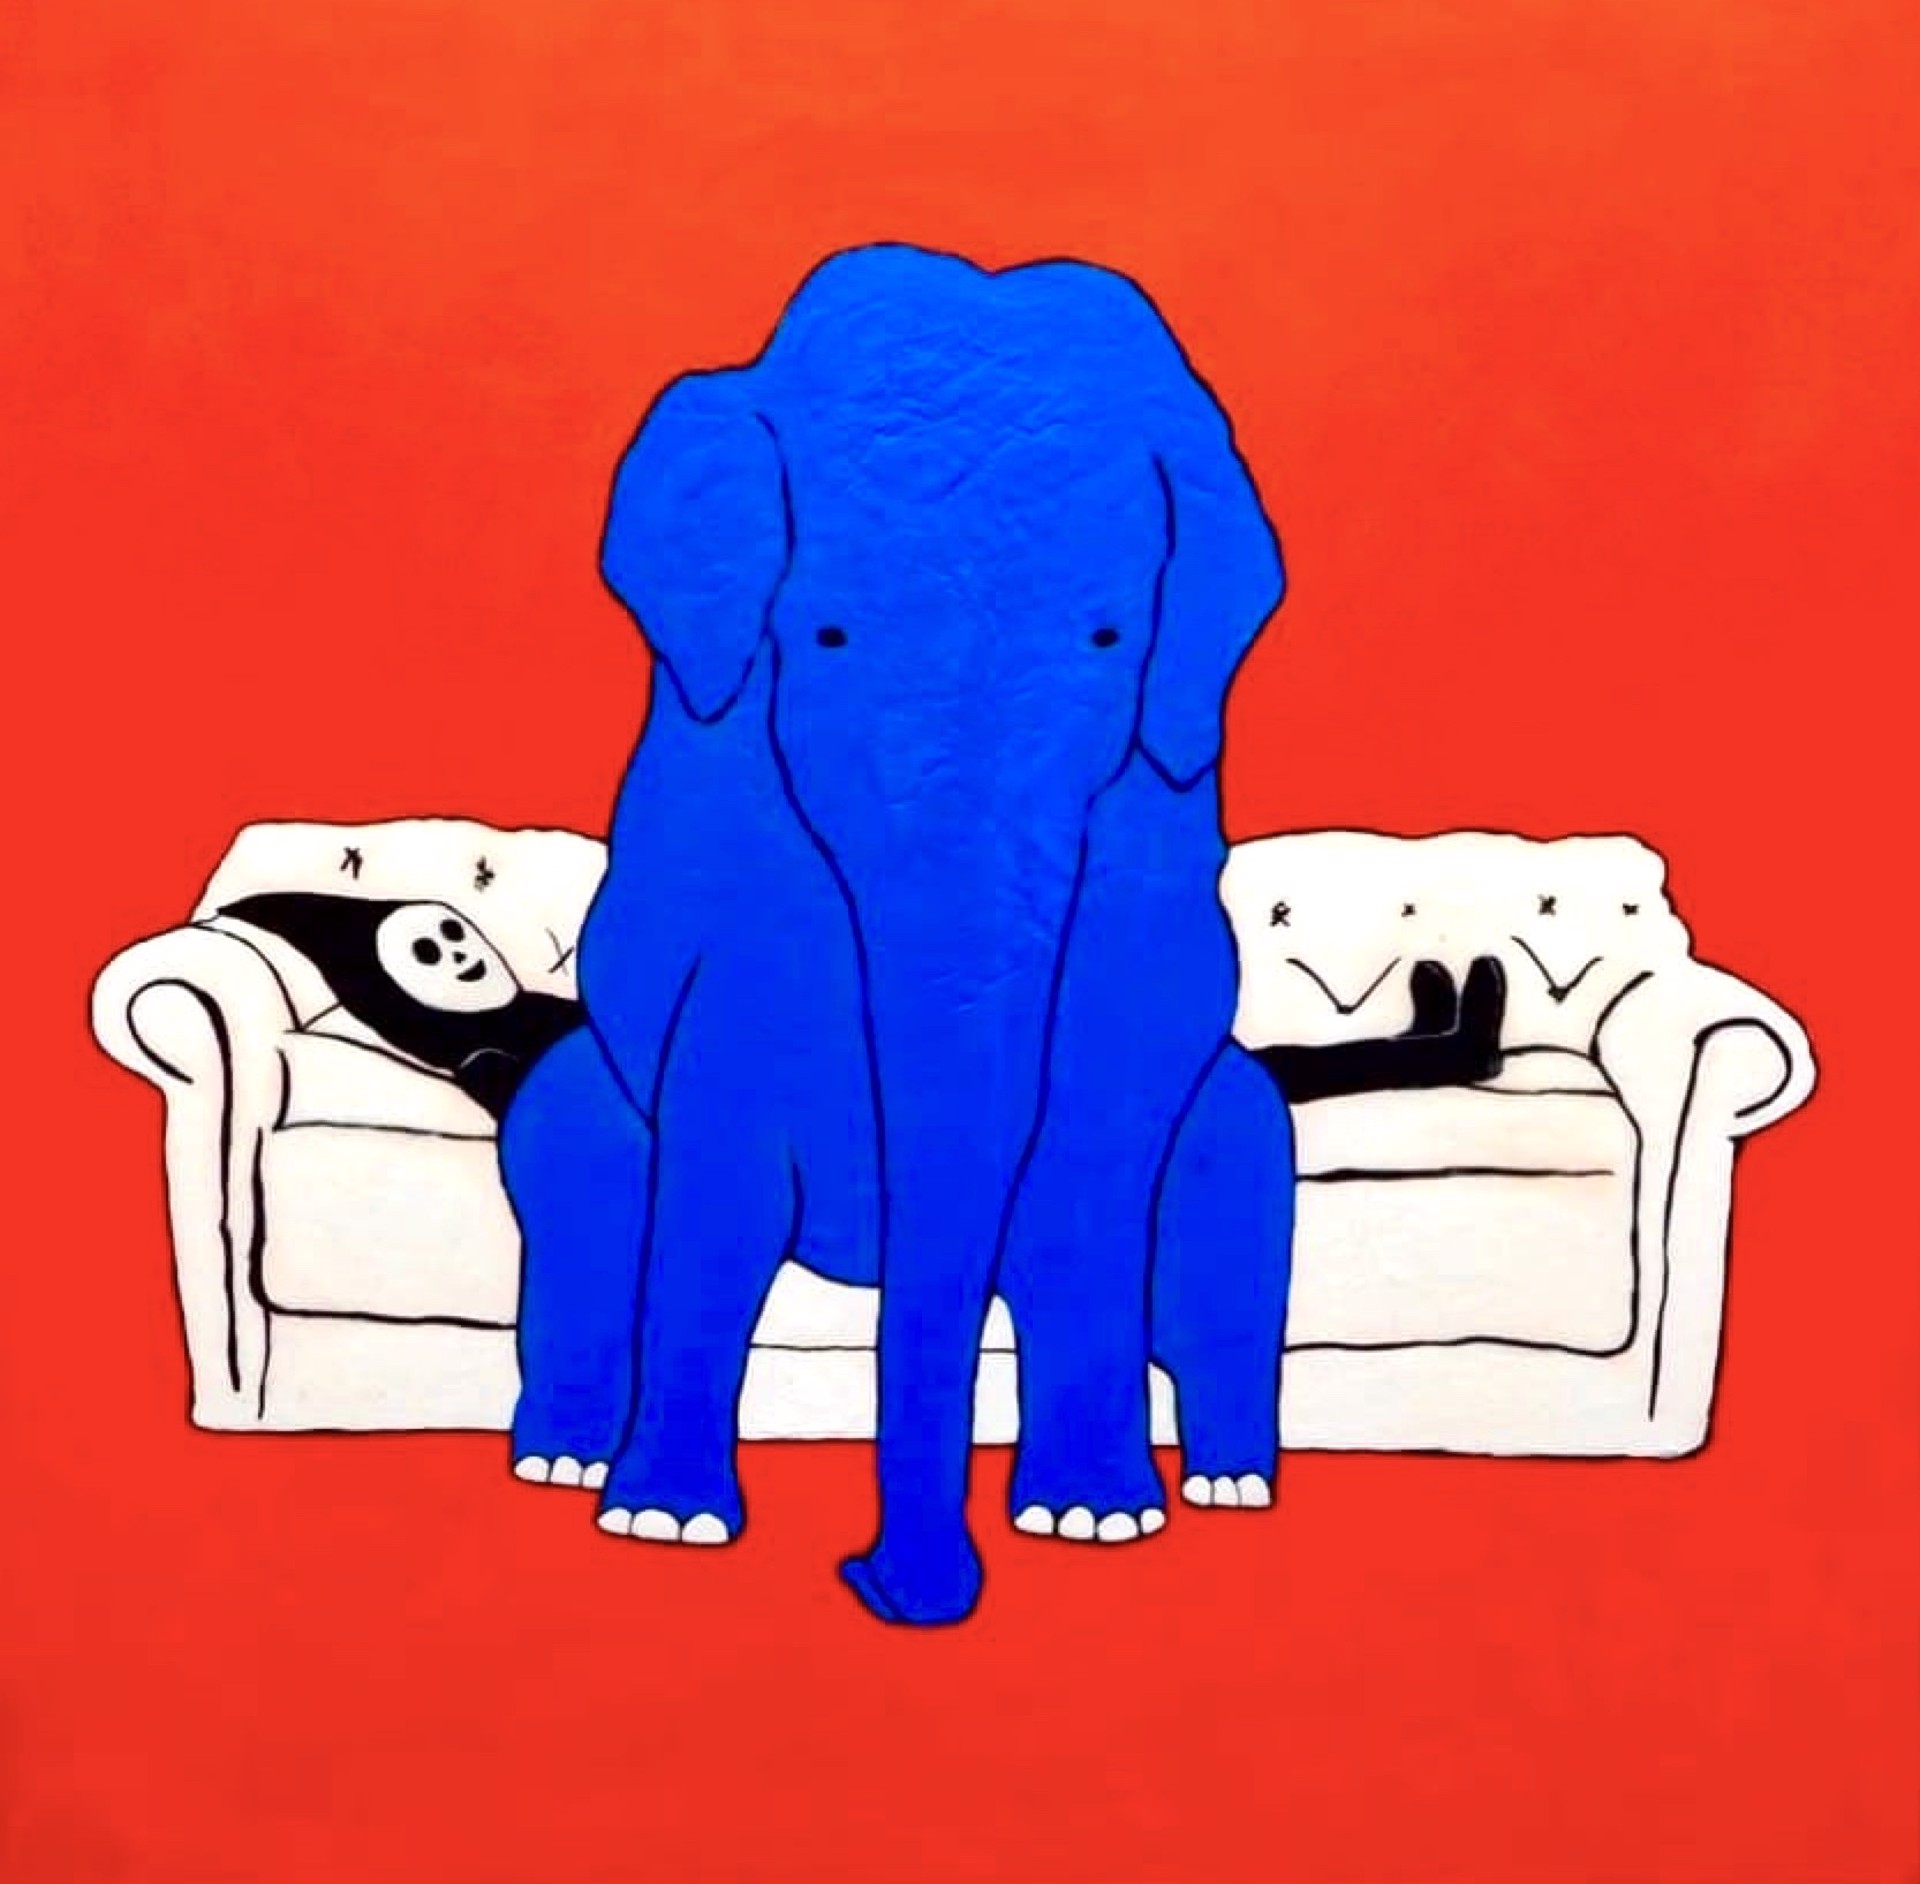 Elephant in the Room by Brian Leo